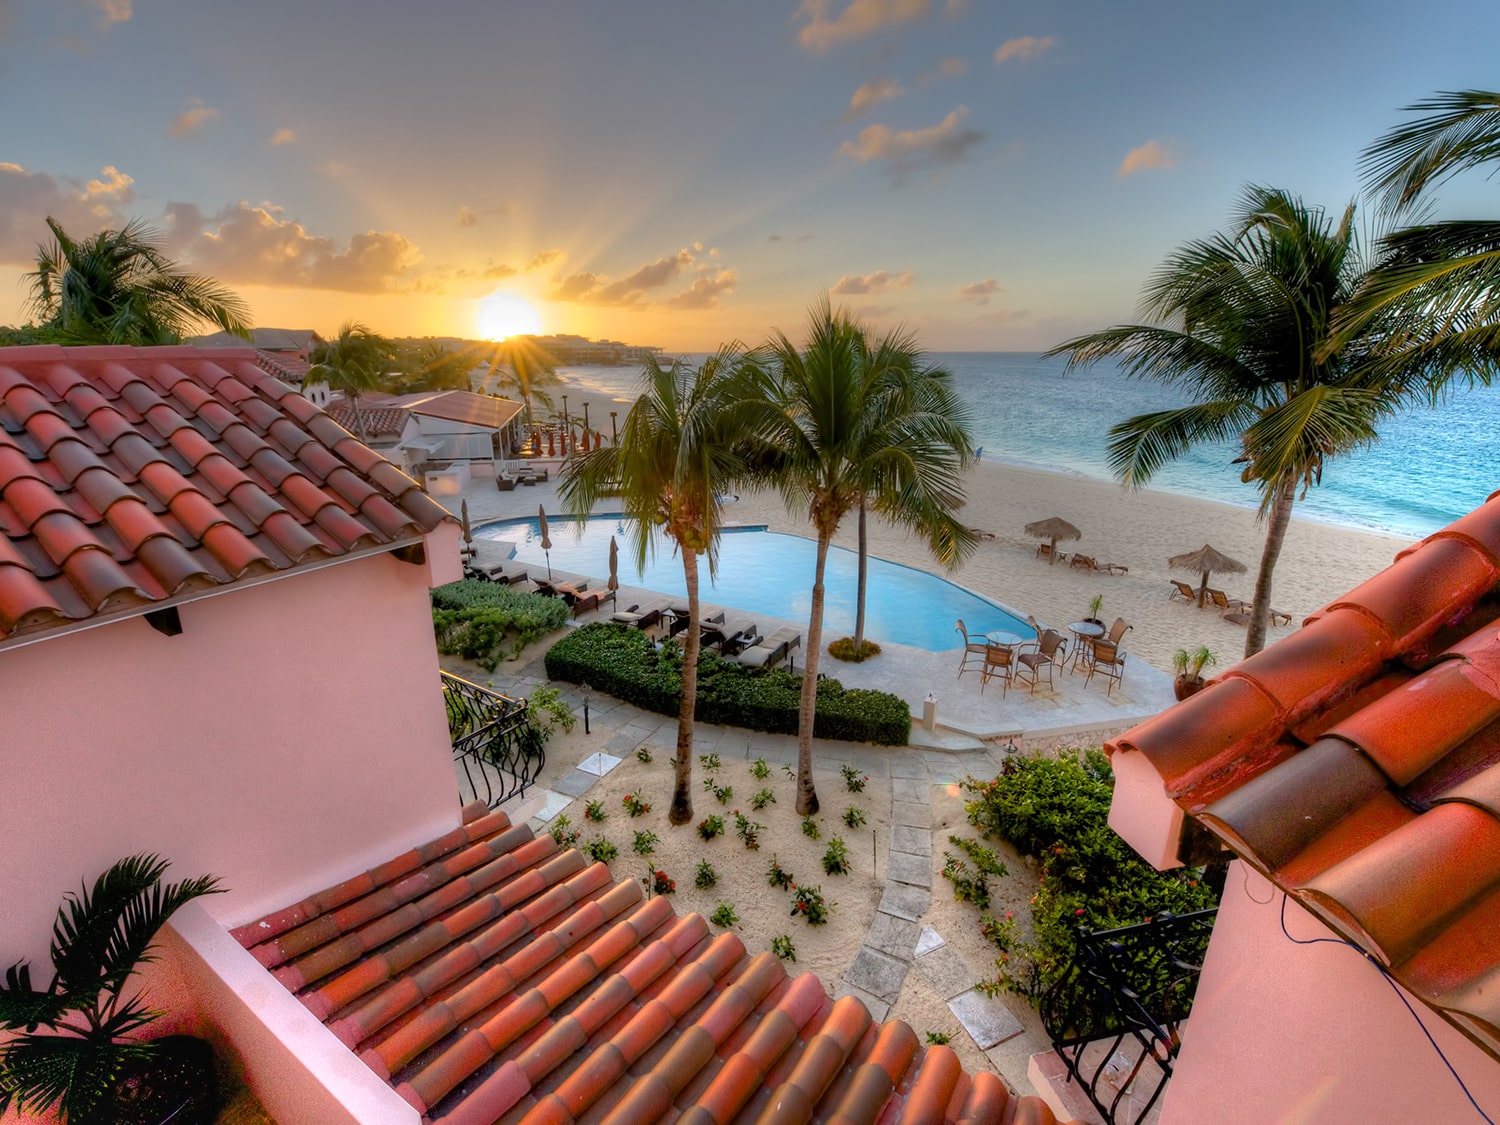 A sunset view of the pool and beach at Frangipani Beach Resort, located on Meads Bay in Anguilla.